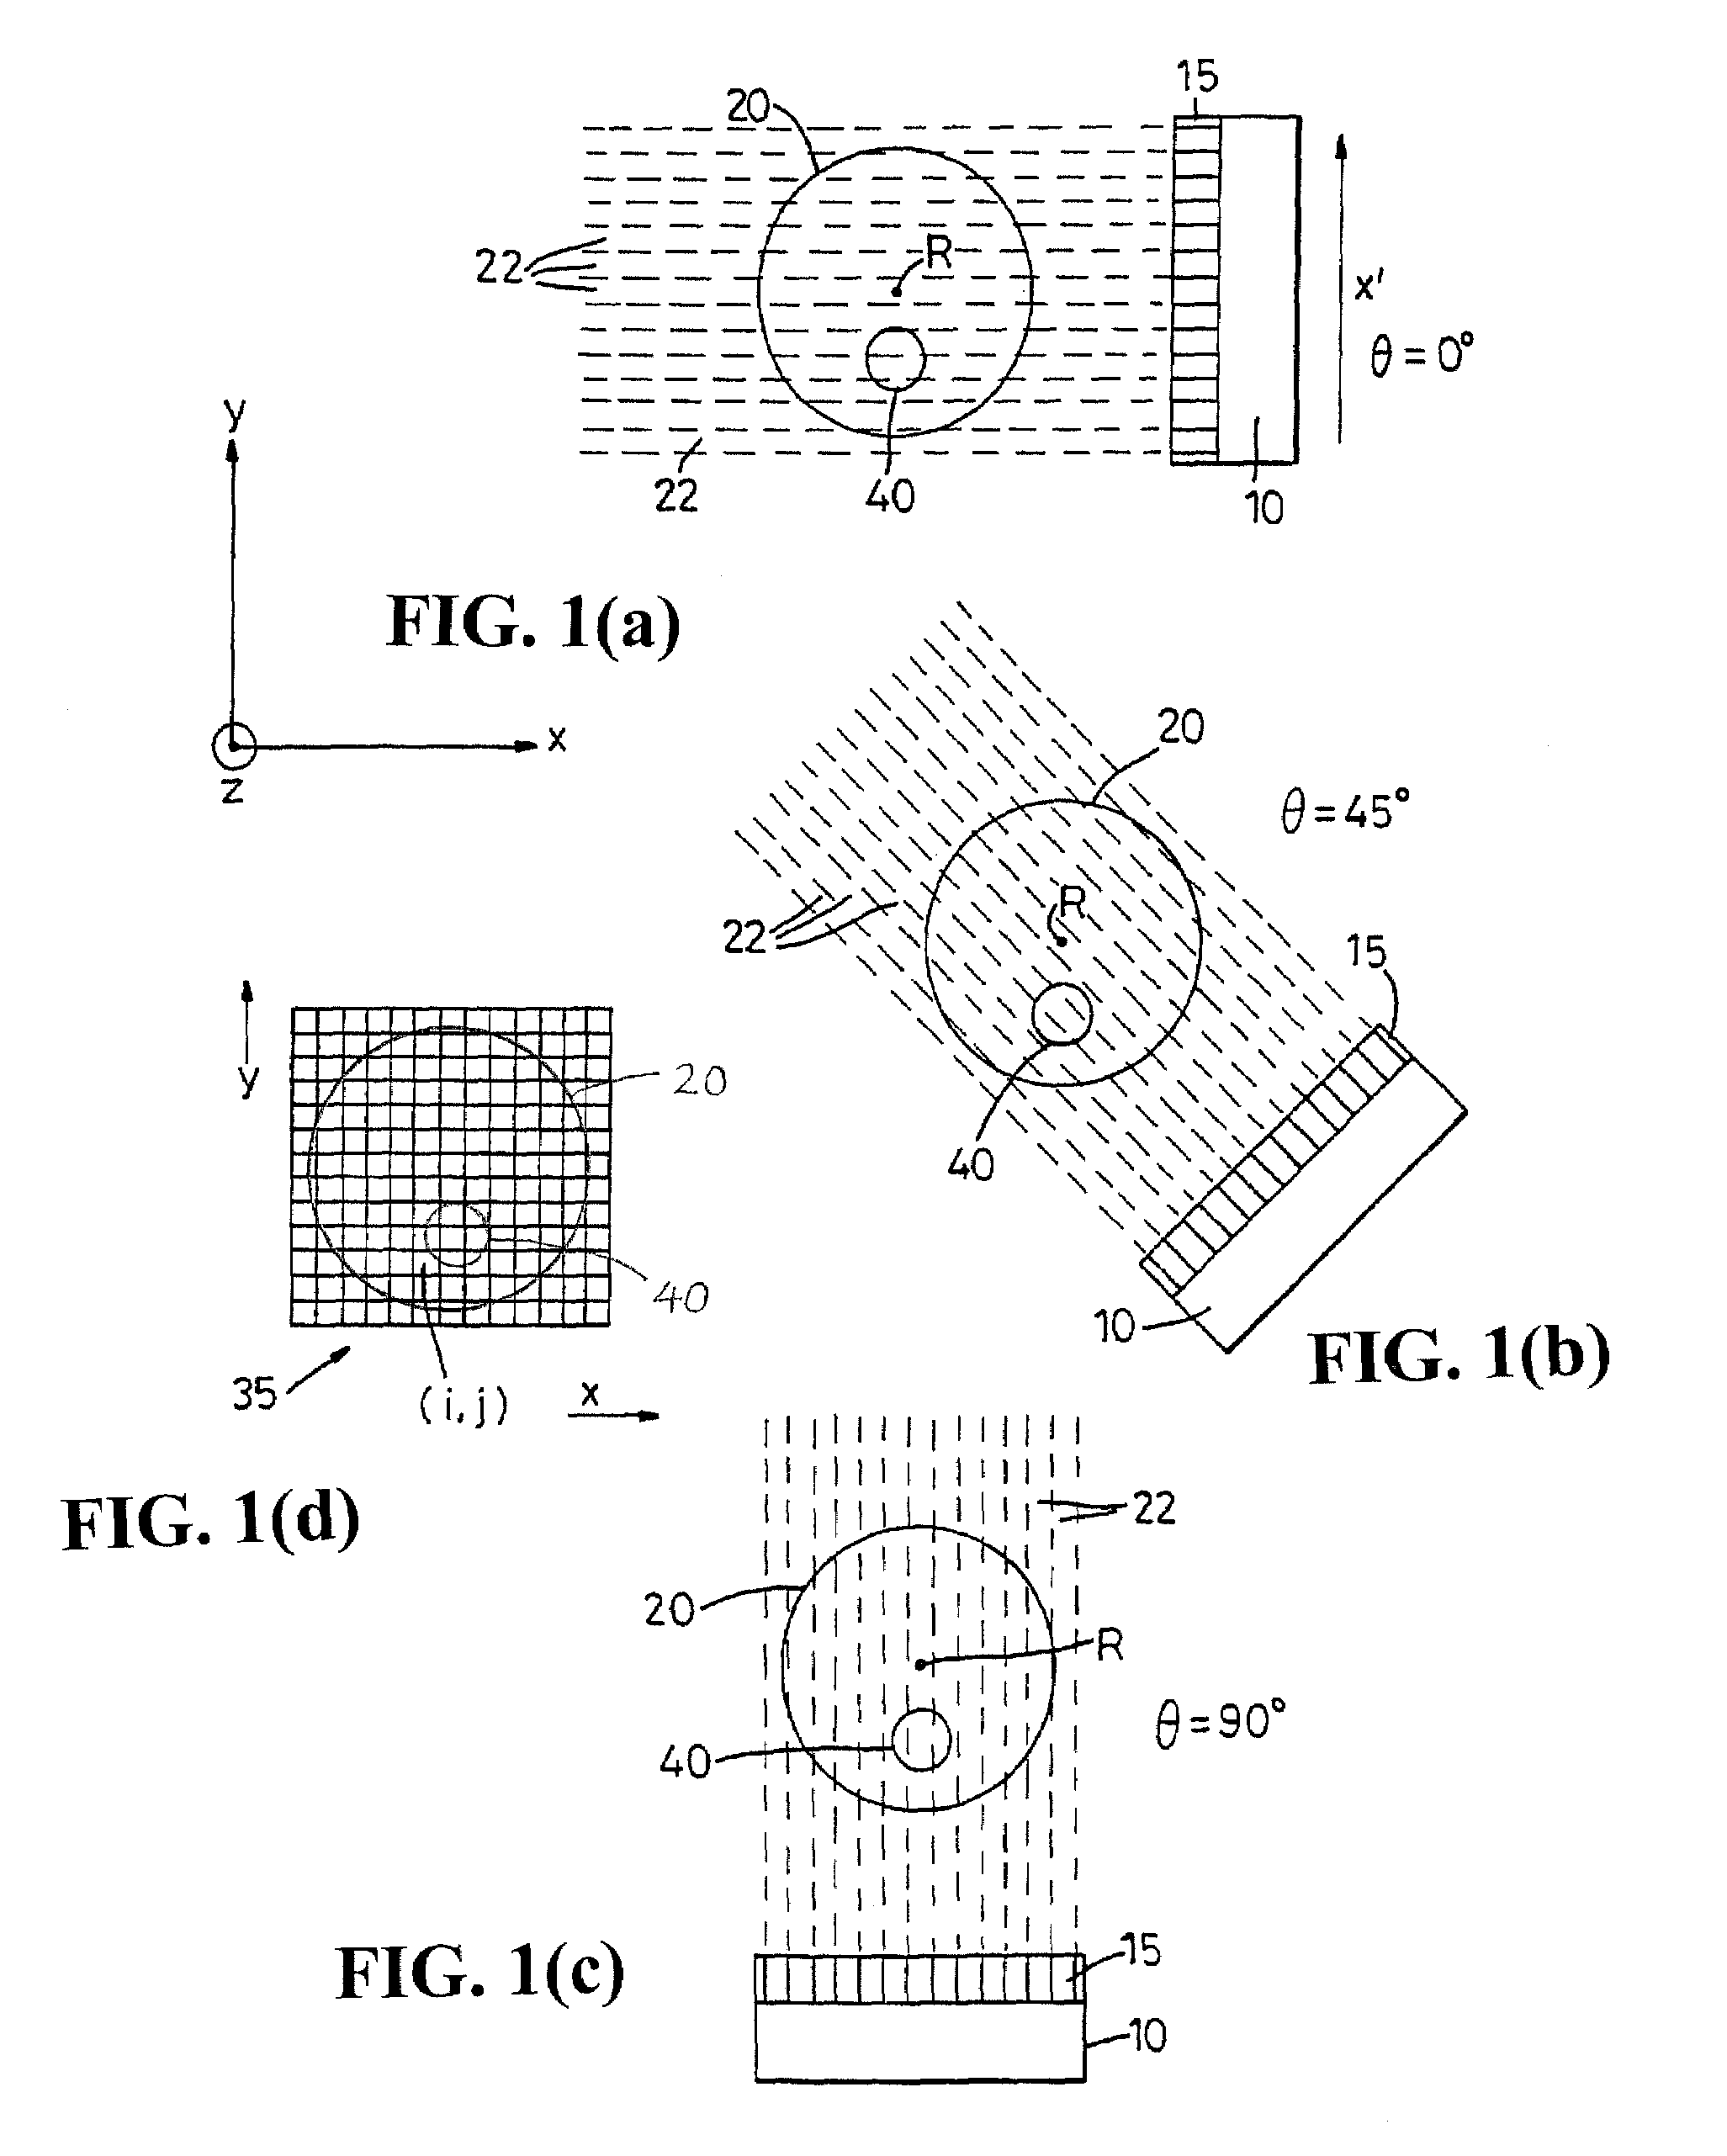 Object identifying system for segmenting unreconstructed data in image tomography